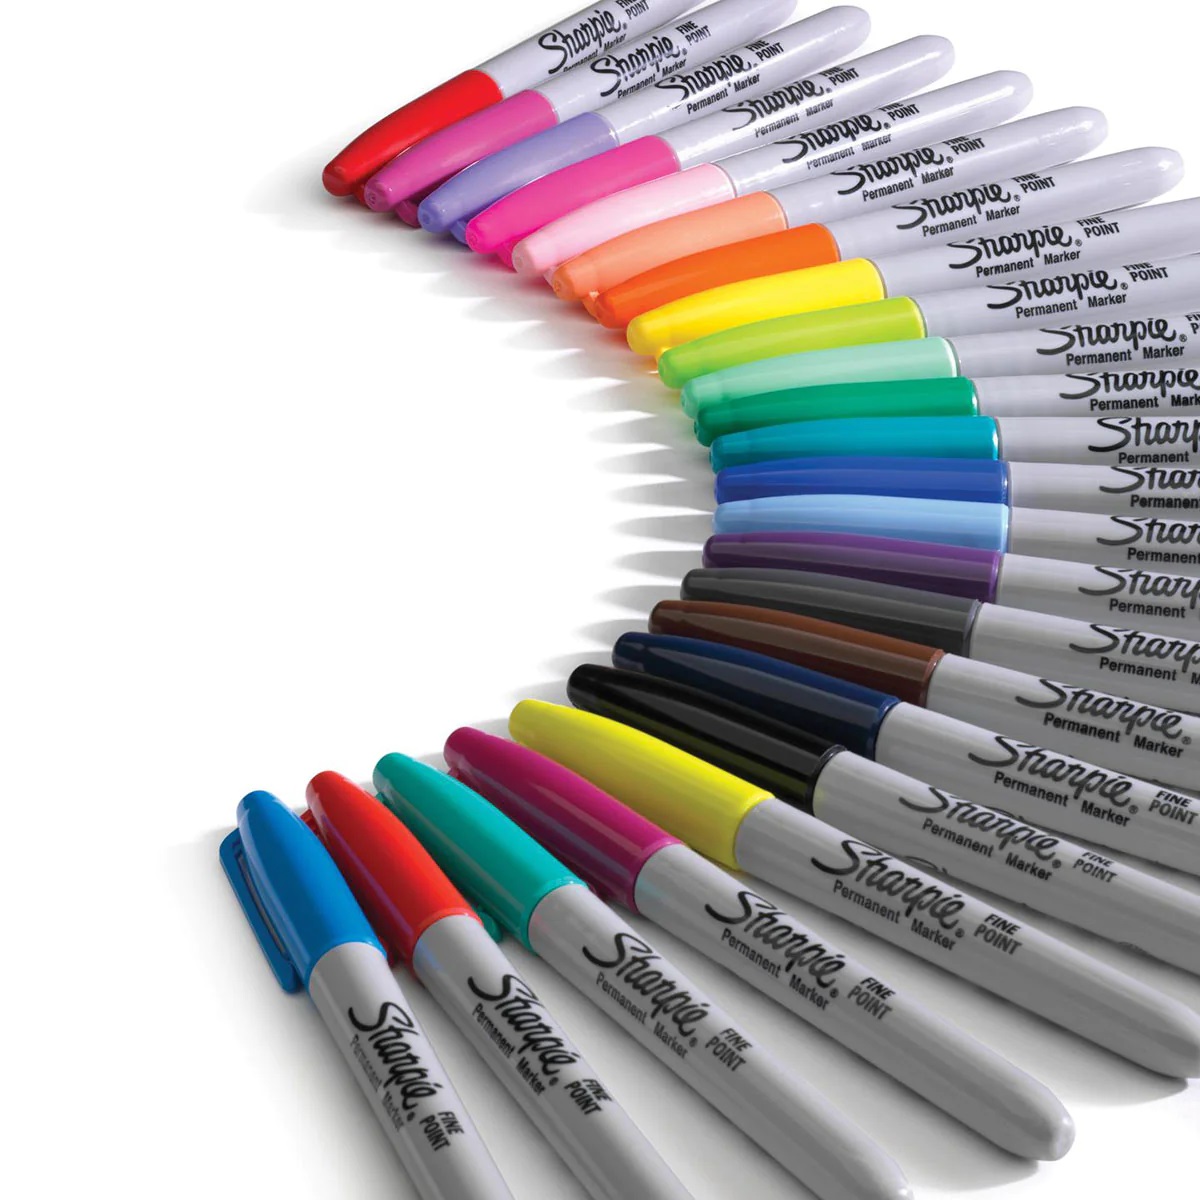 How To Store Sharpie Markers